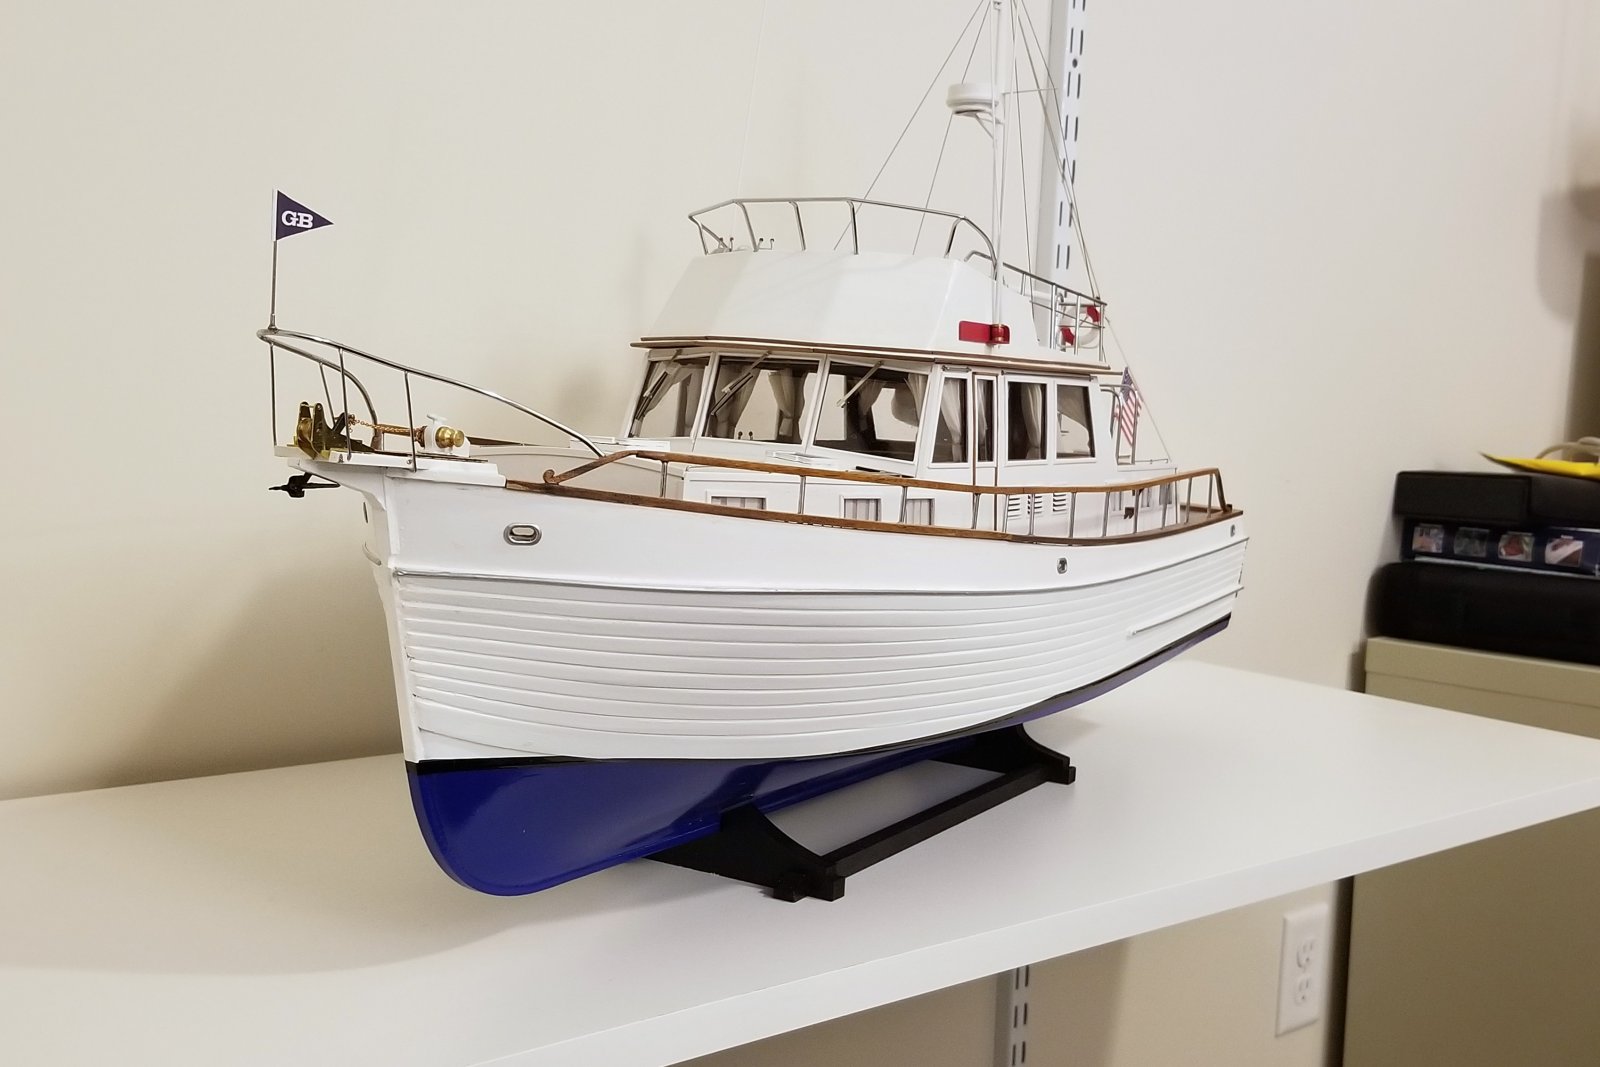 Heritage 46 Yacht by drobinson02199 - Amati - Scale 1:20 - SMALL